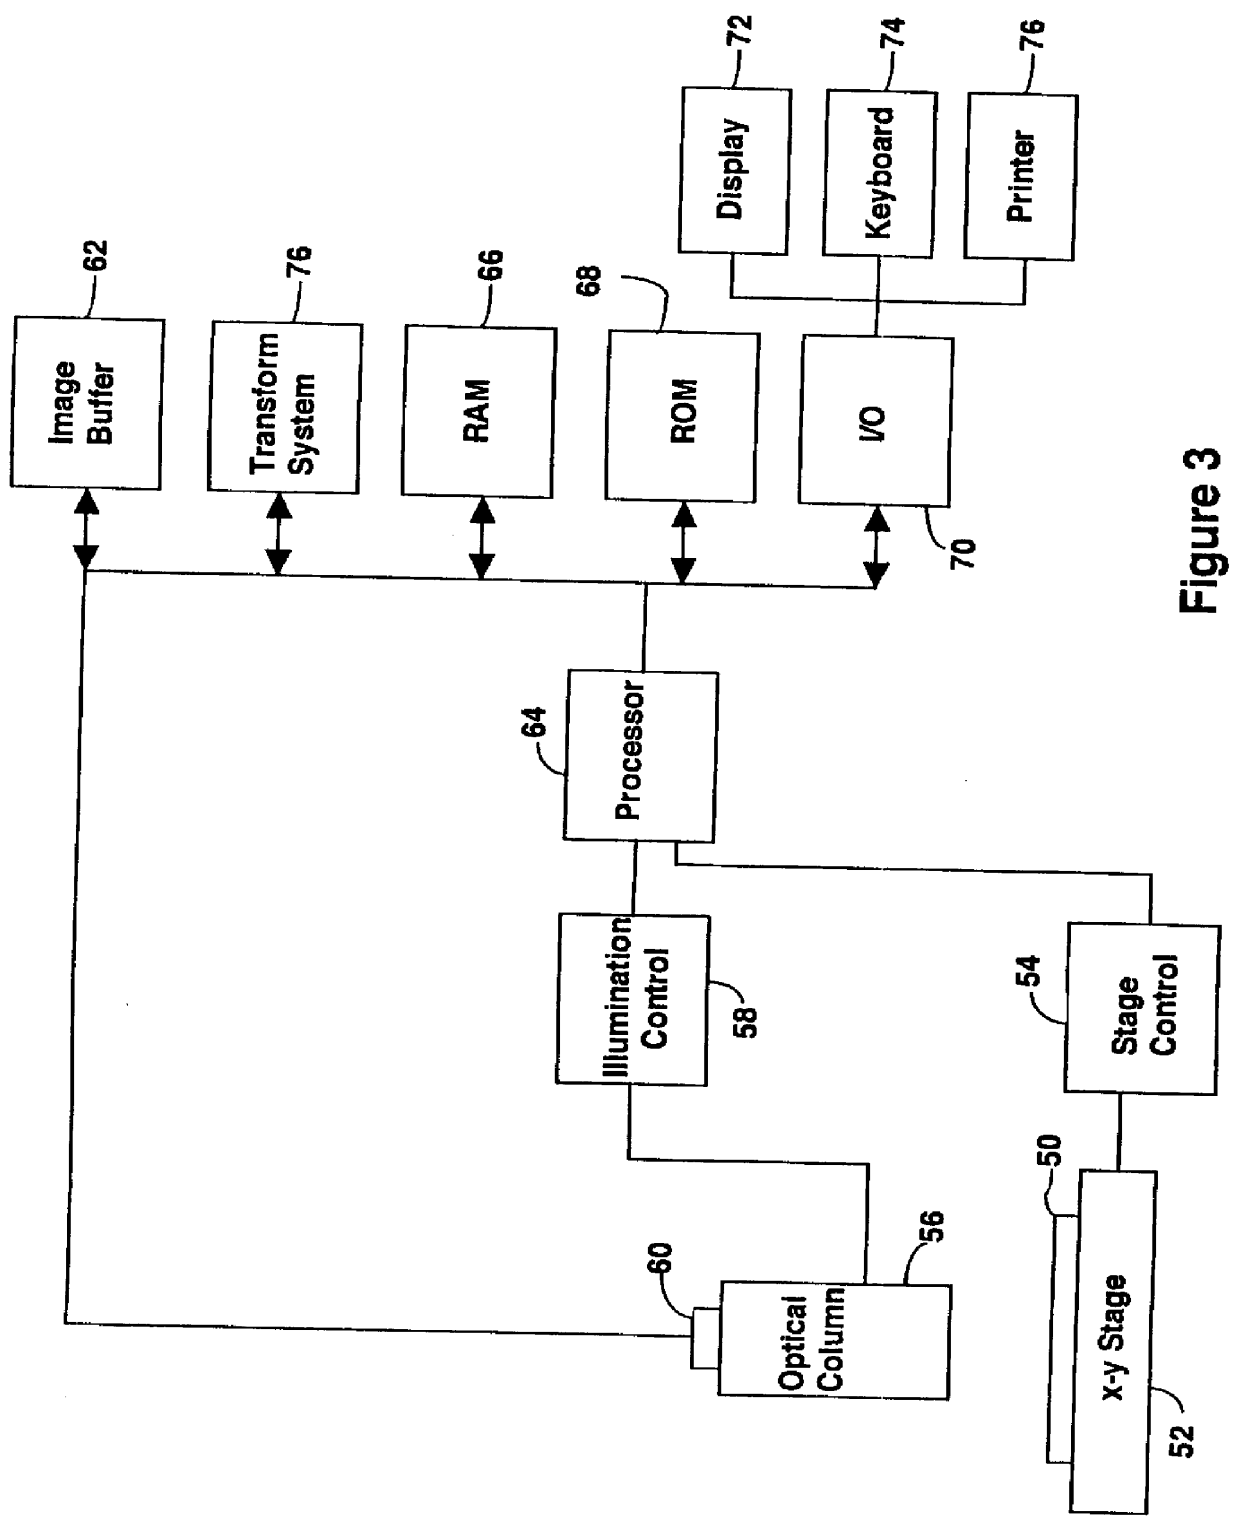 Inspection method and apparatus for the inspection of either random or repeating patterns